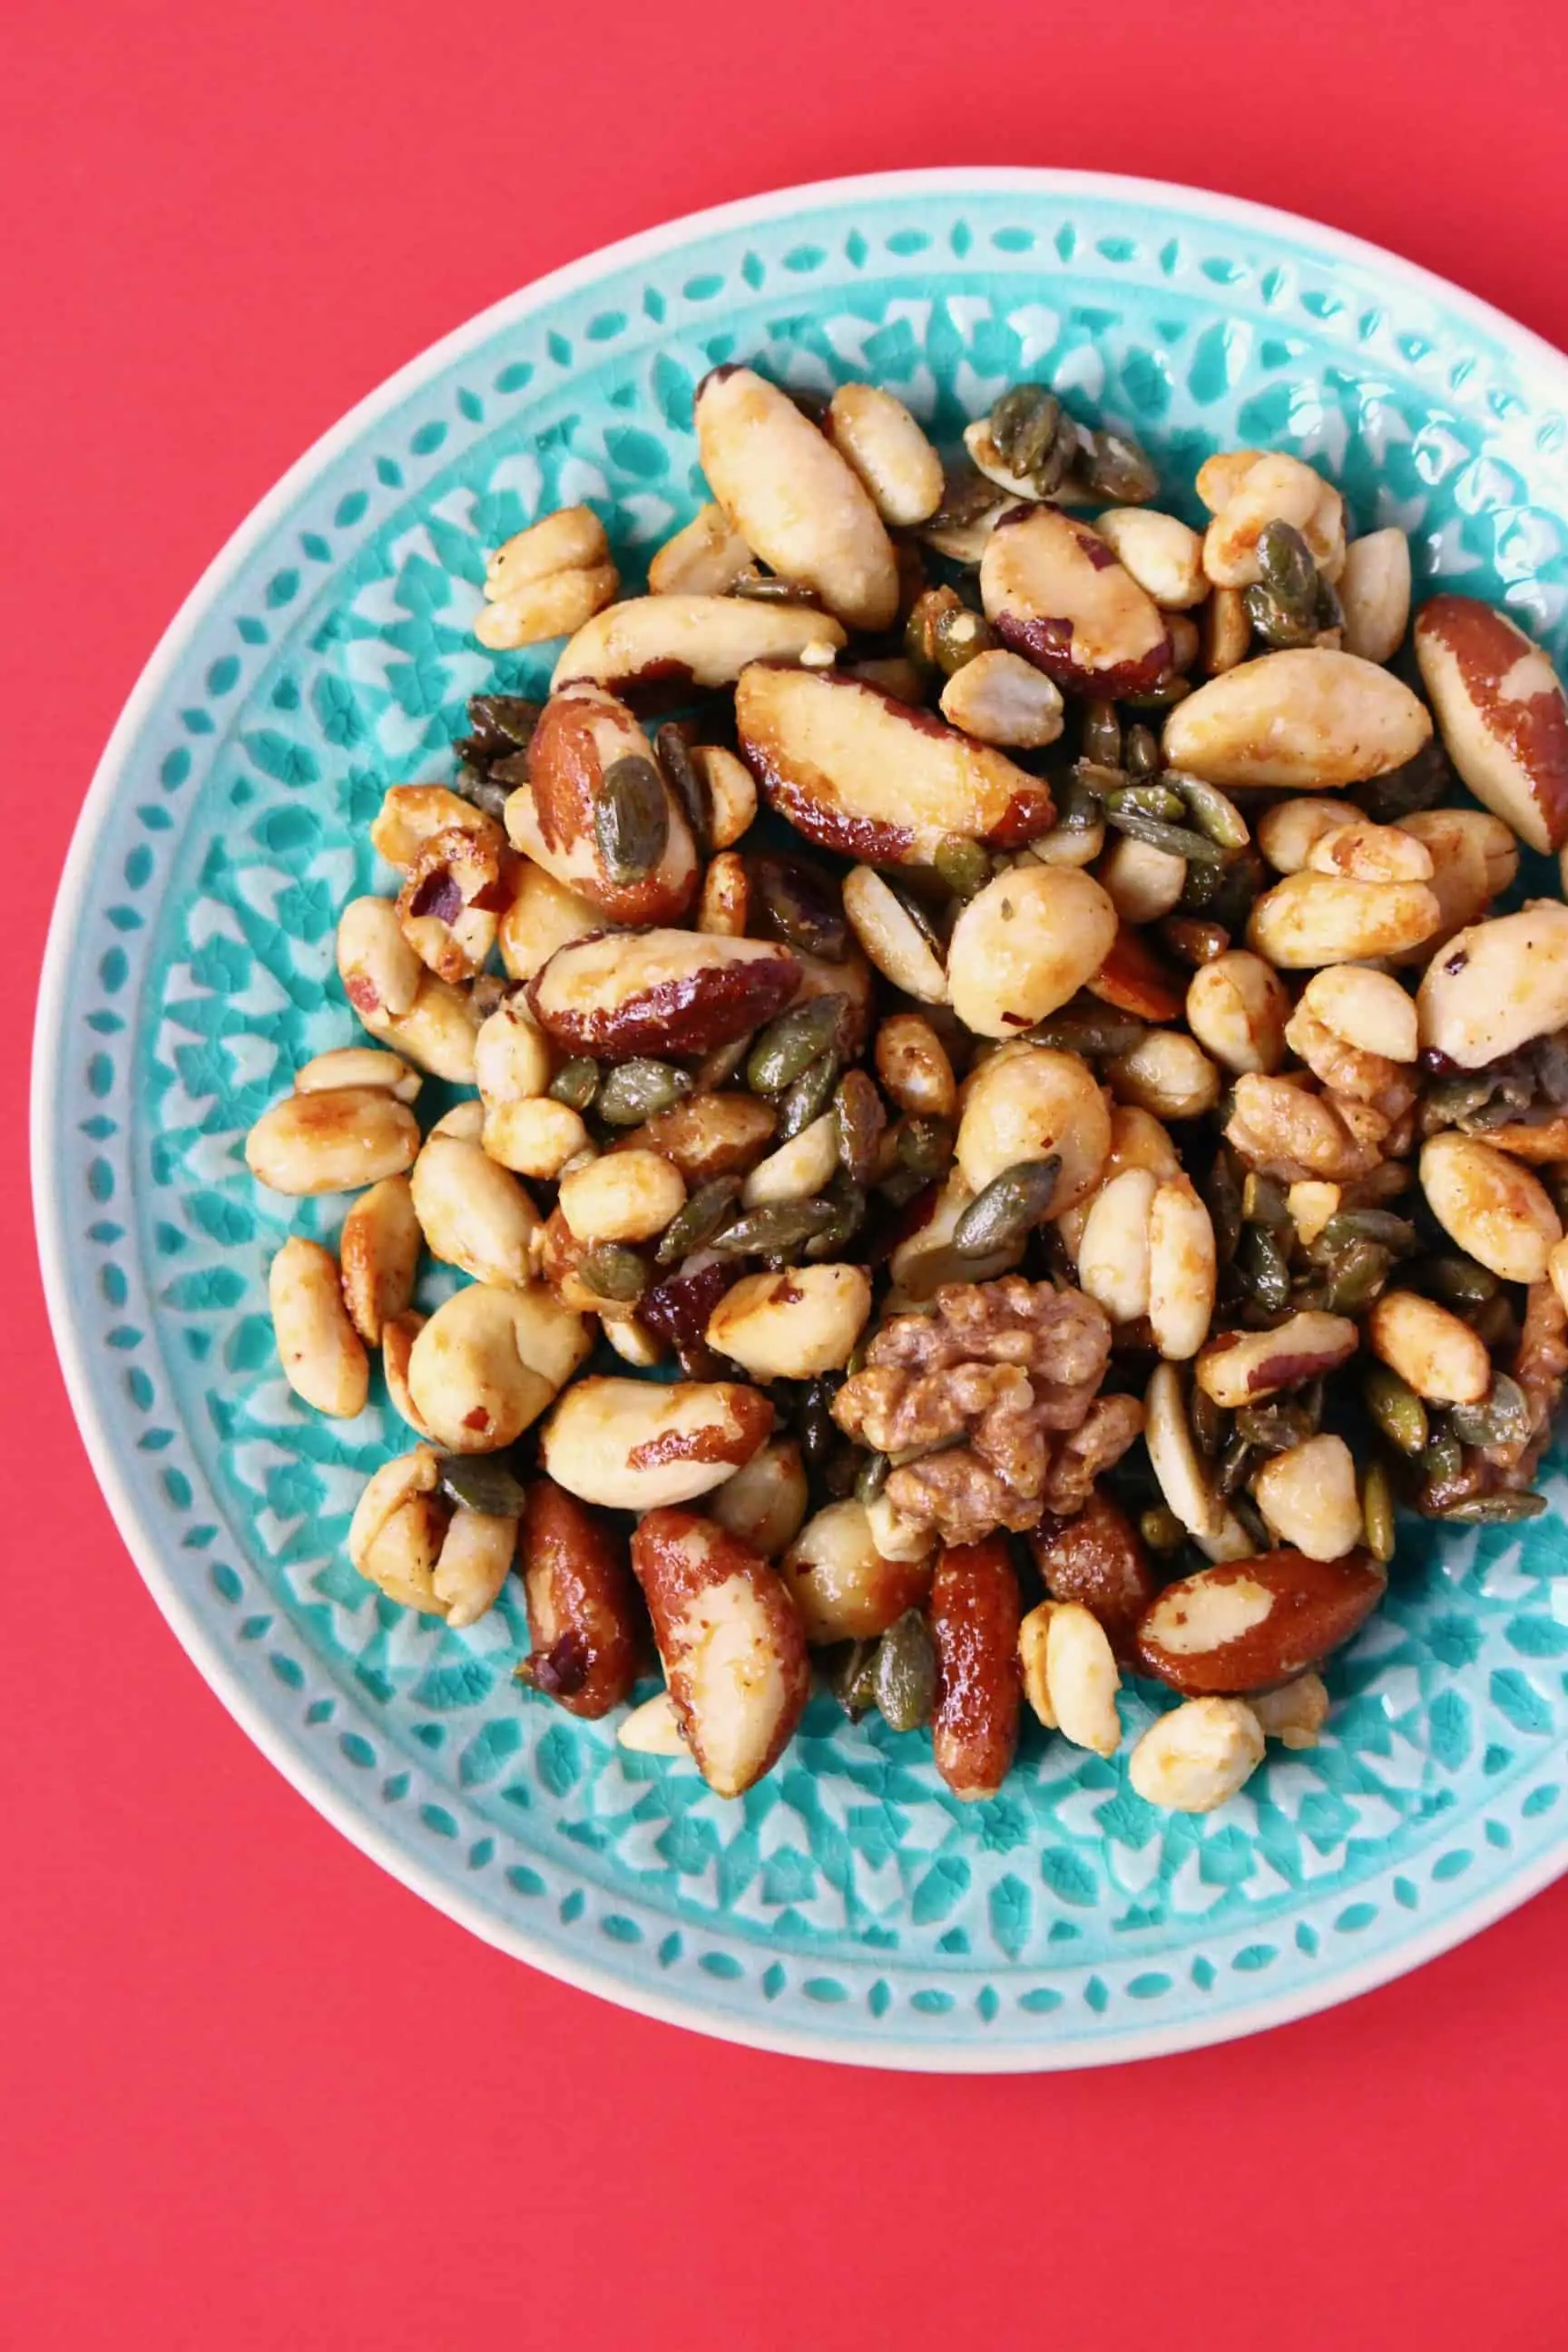 Candied nuts on a green plate against a red background